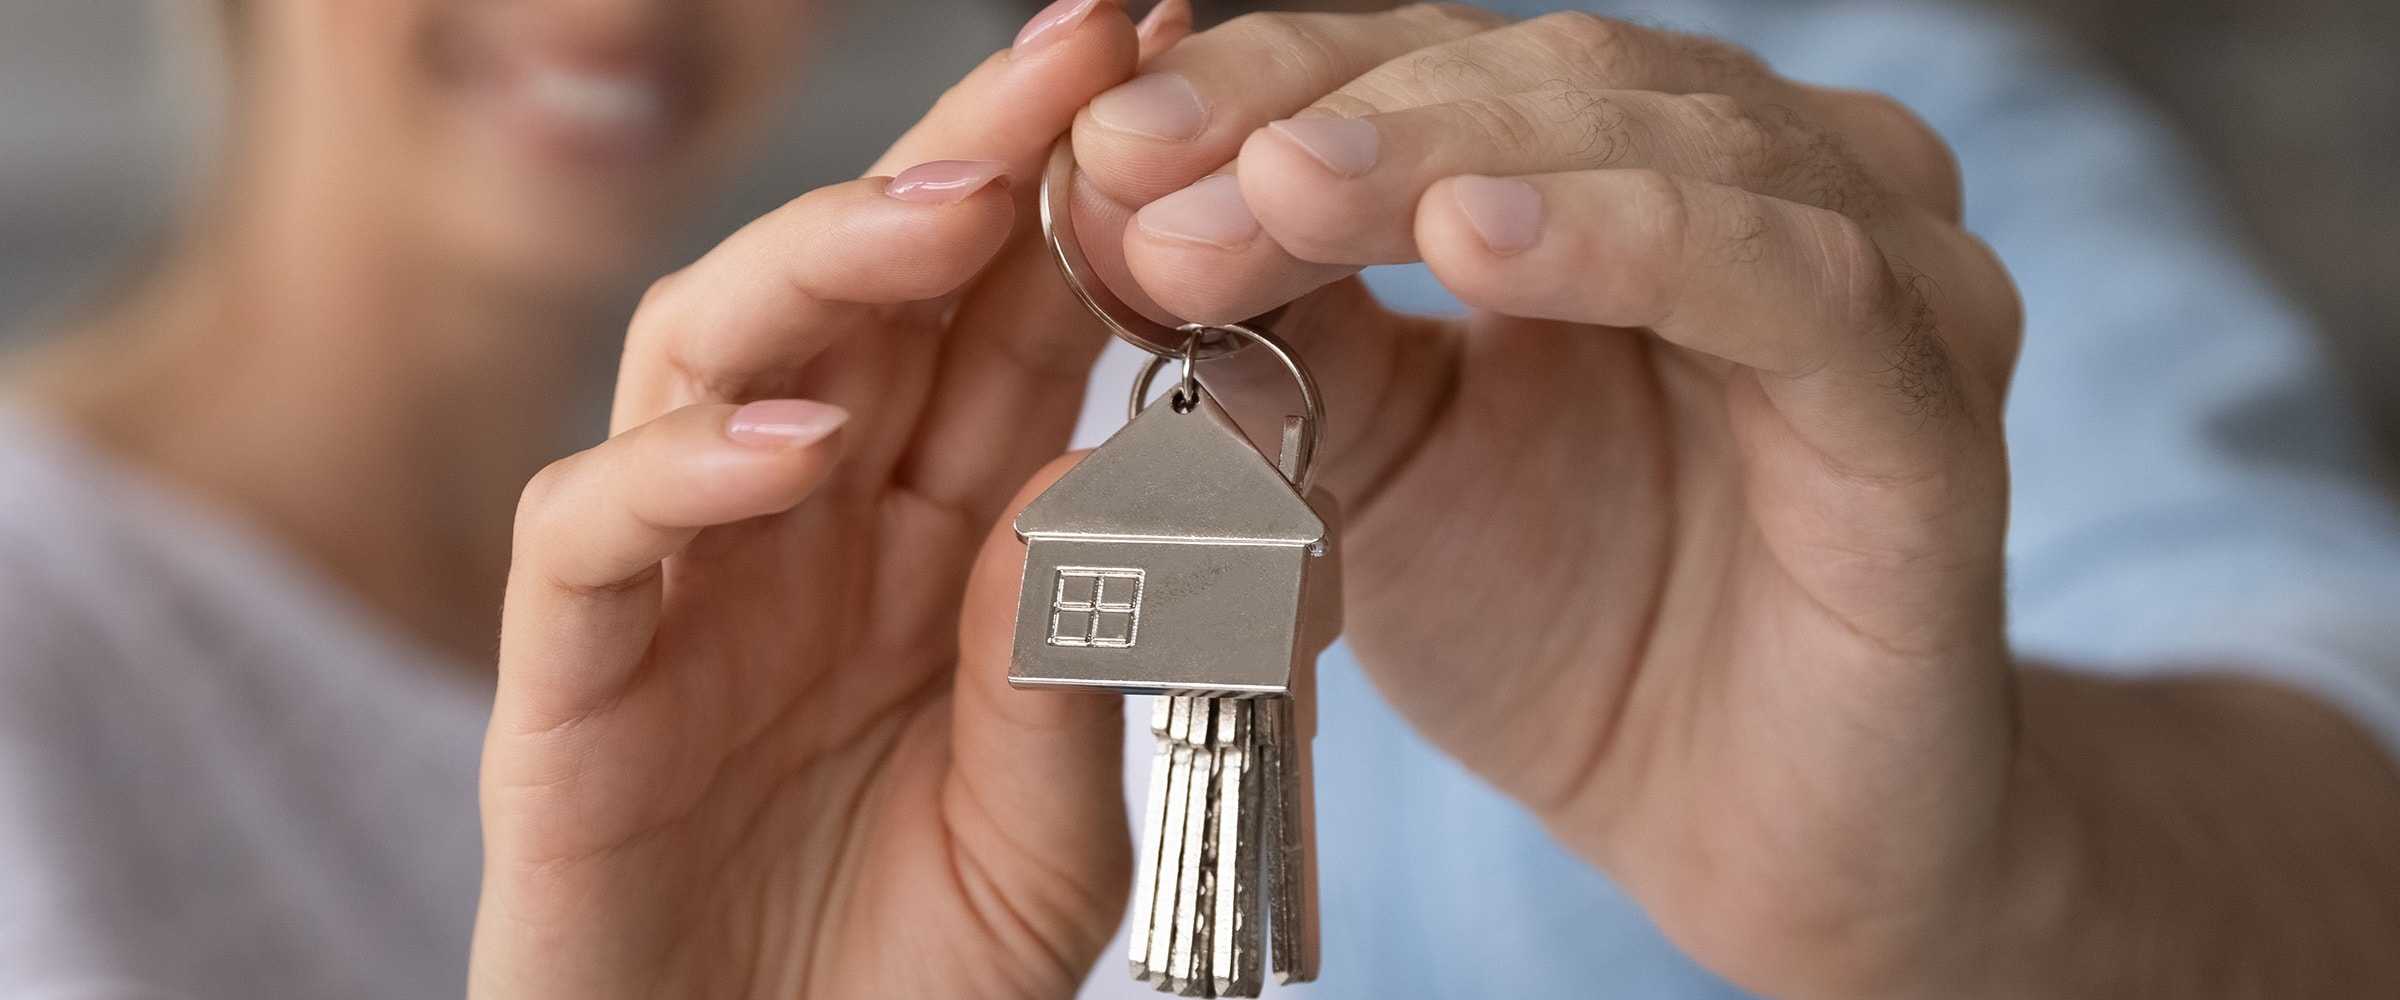 Homes keys in couple's hands